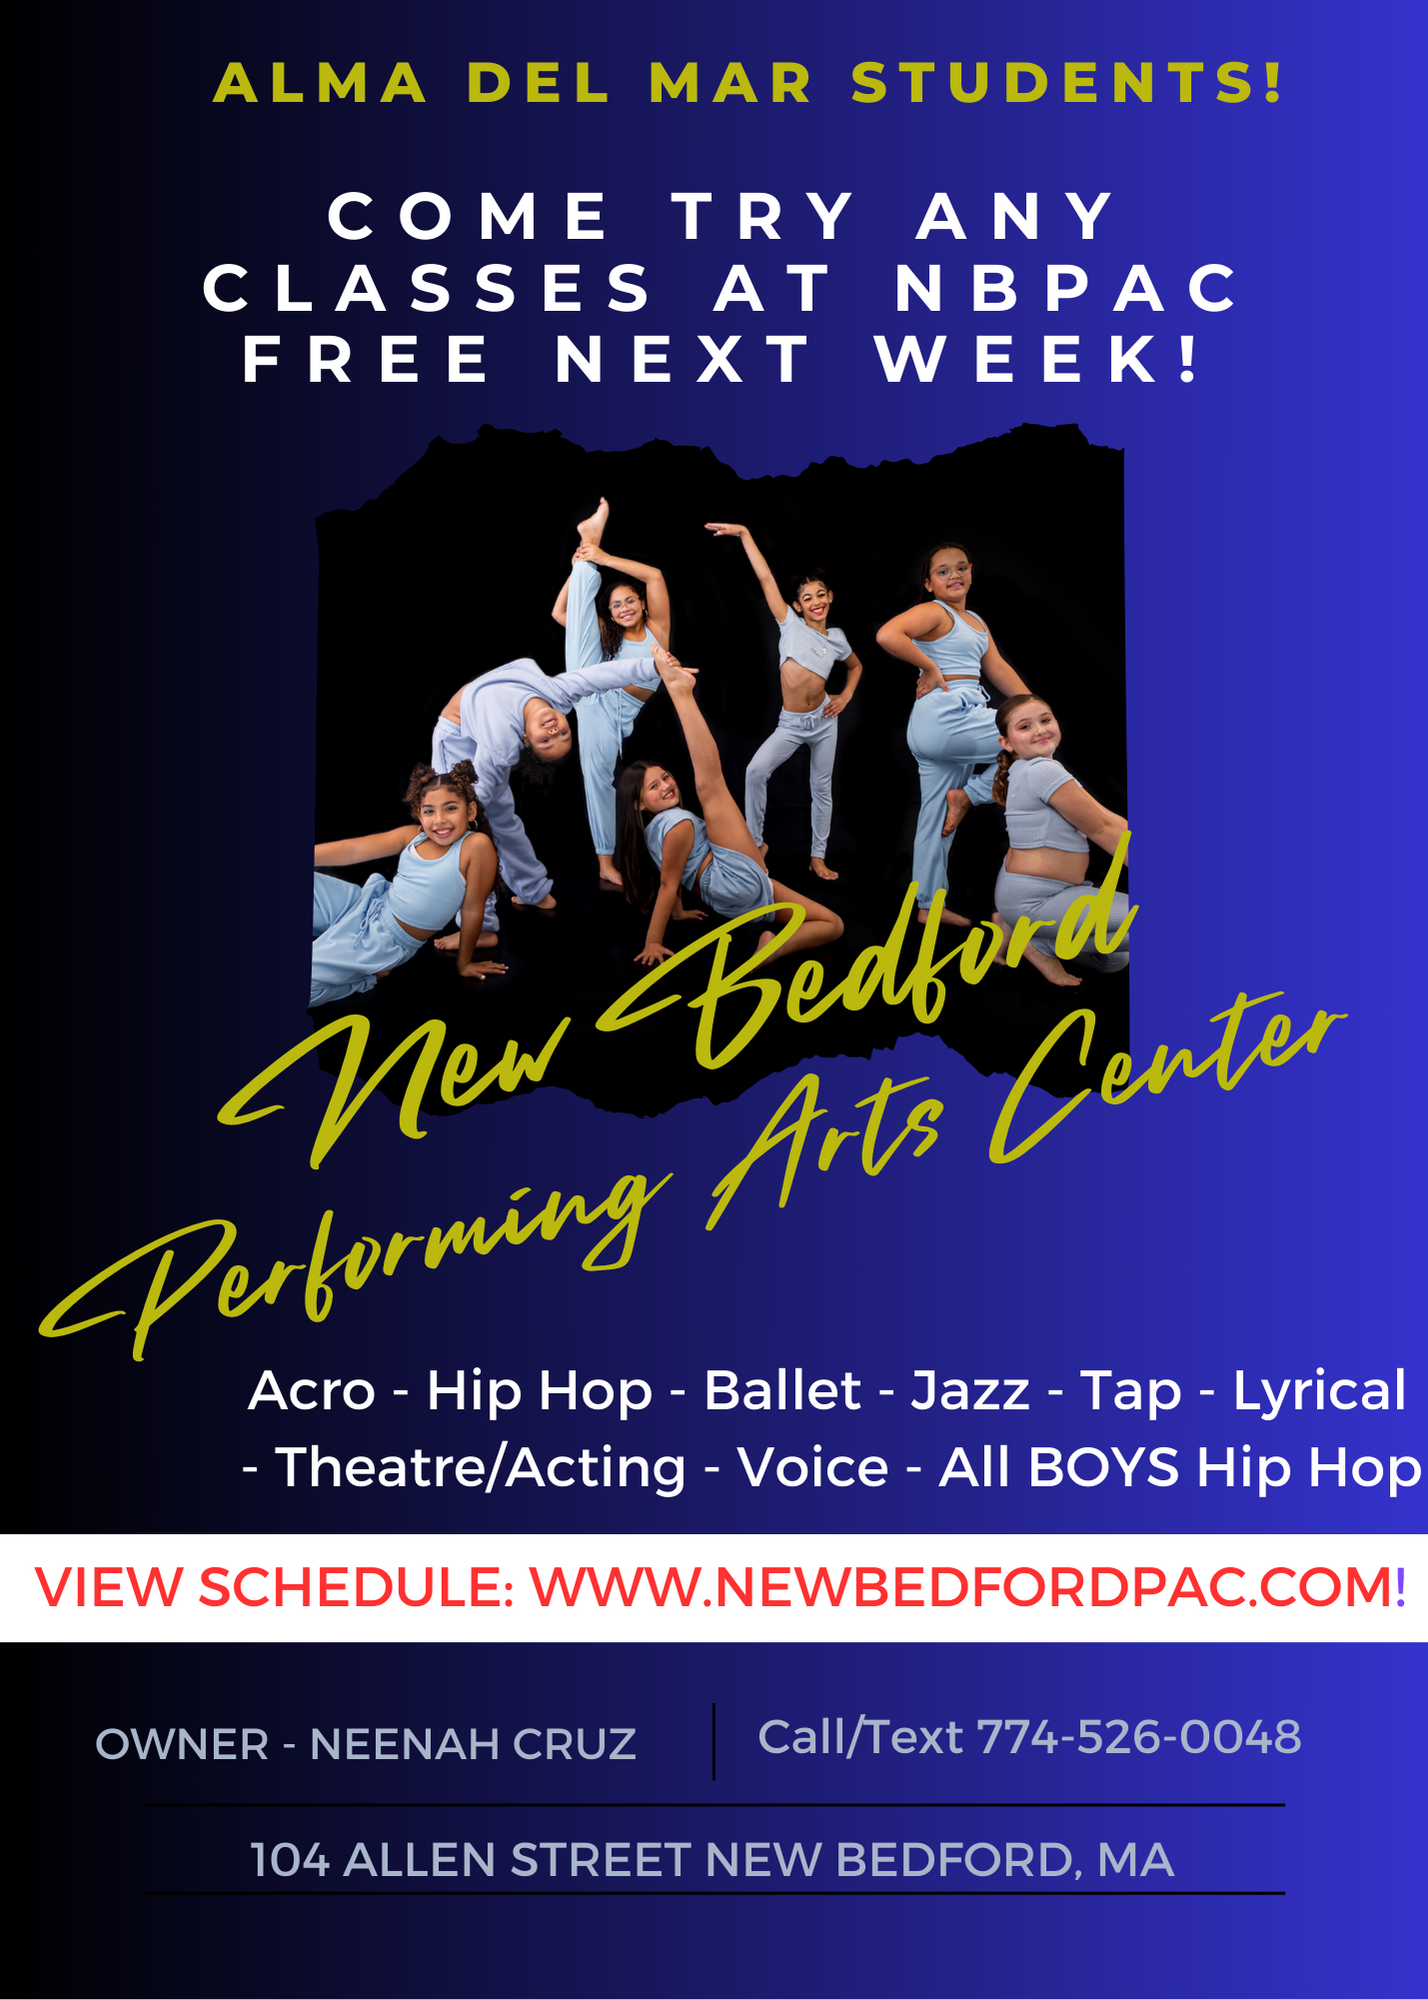 Come try any dance classes FREE at New Bedford Performing Arts Center!